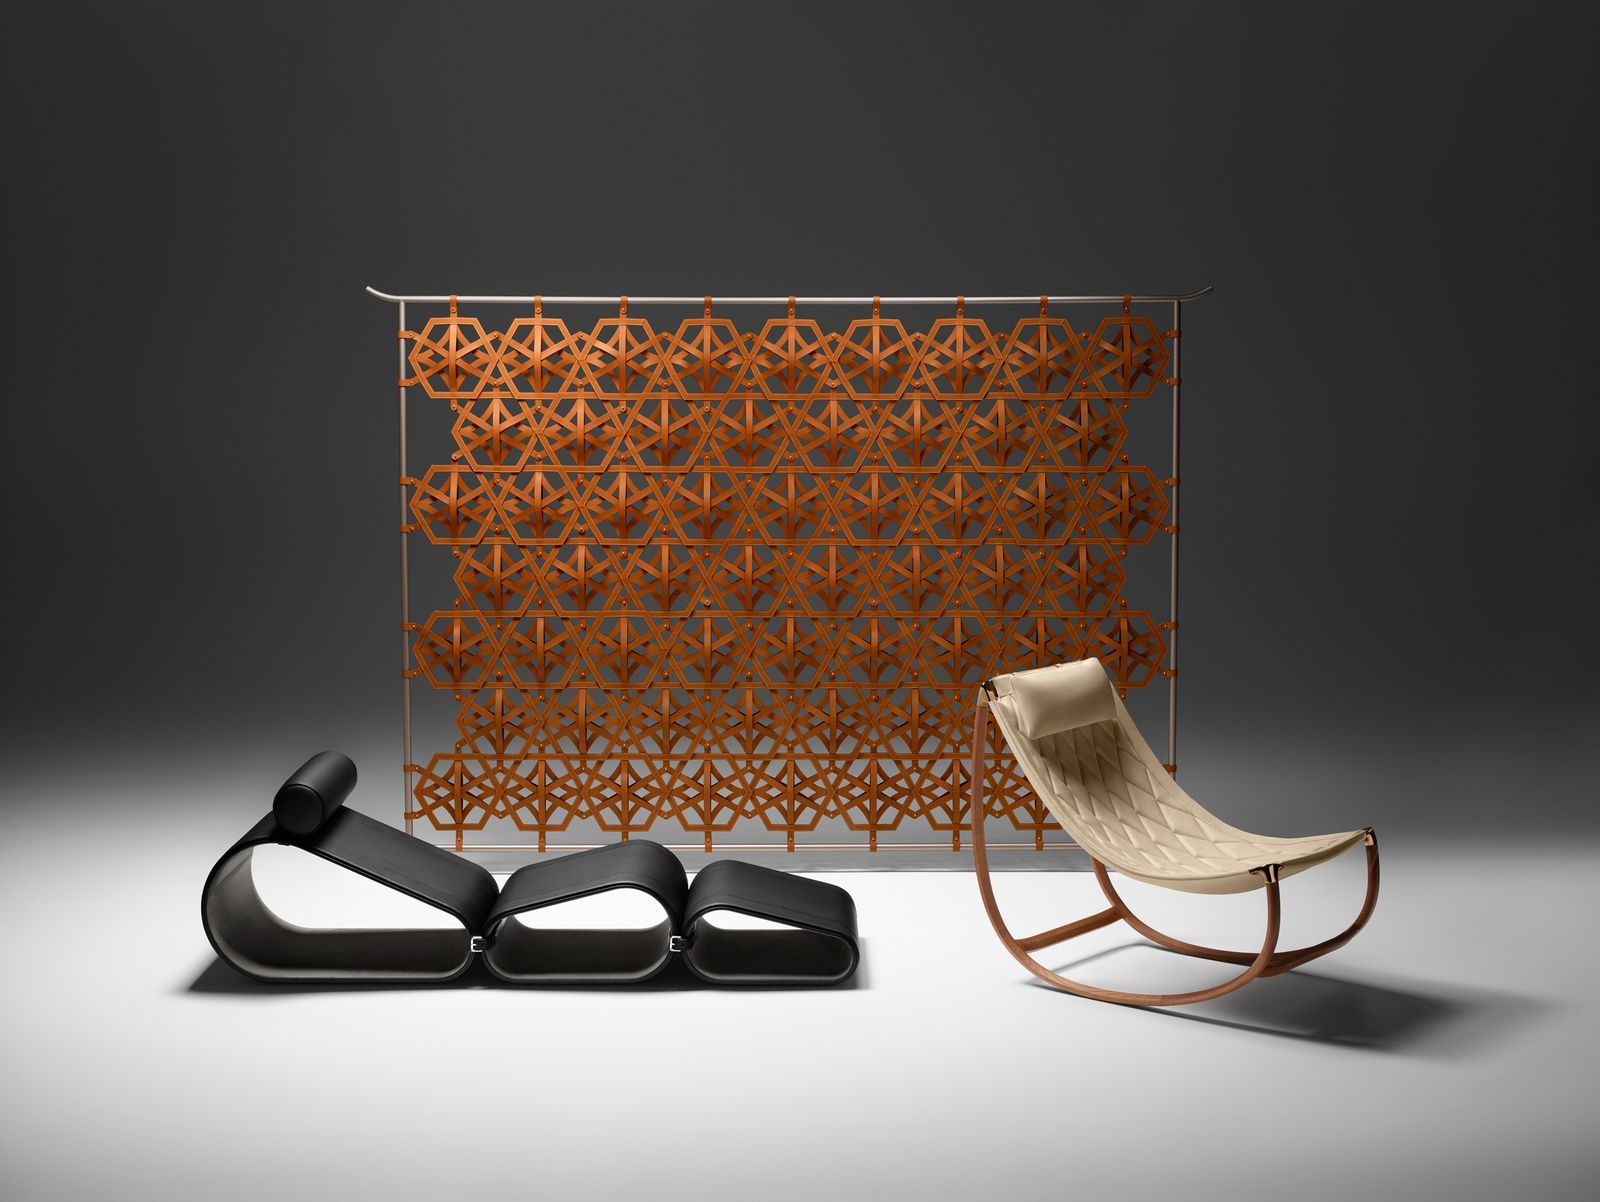 Louis Vuitton Objets Nomades: An Ode To The Natural World. – The